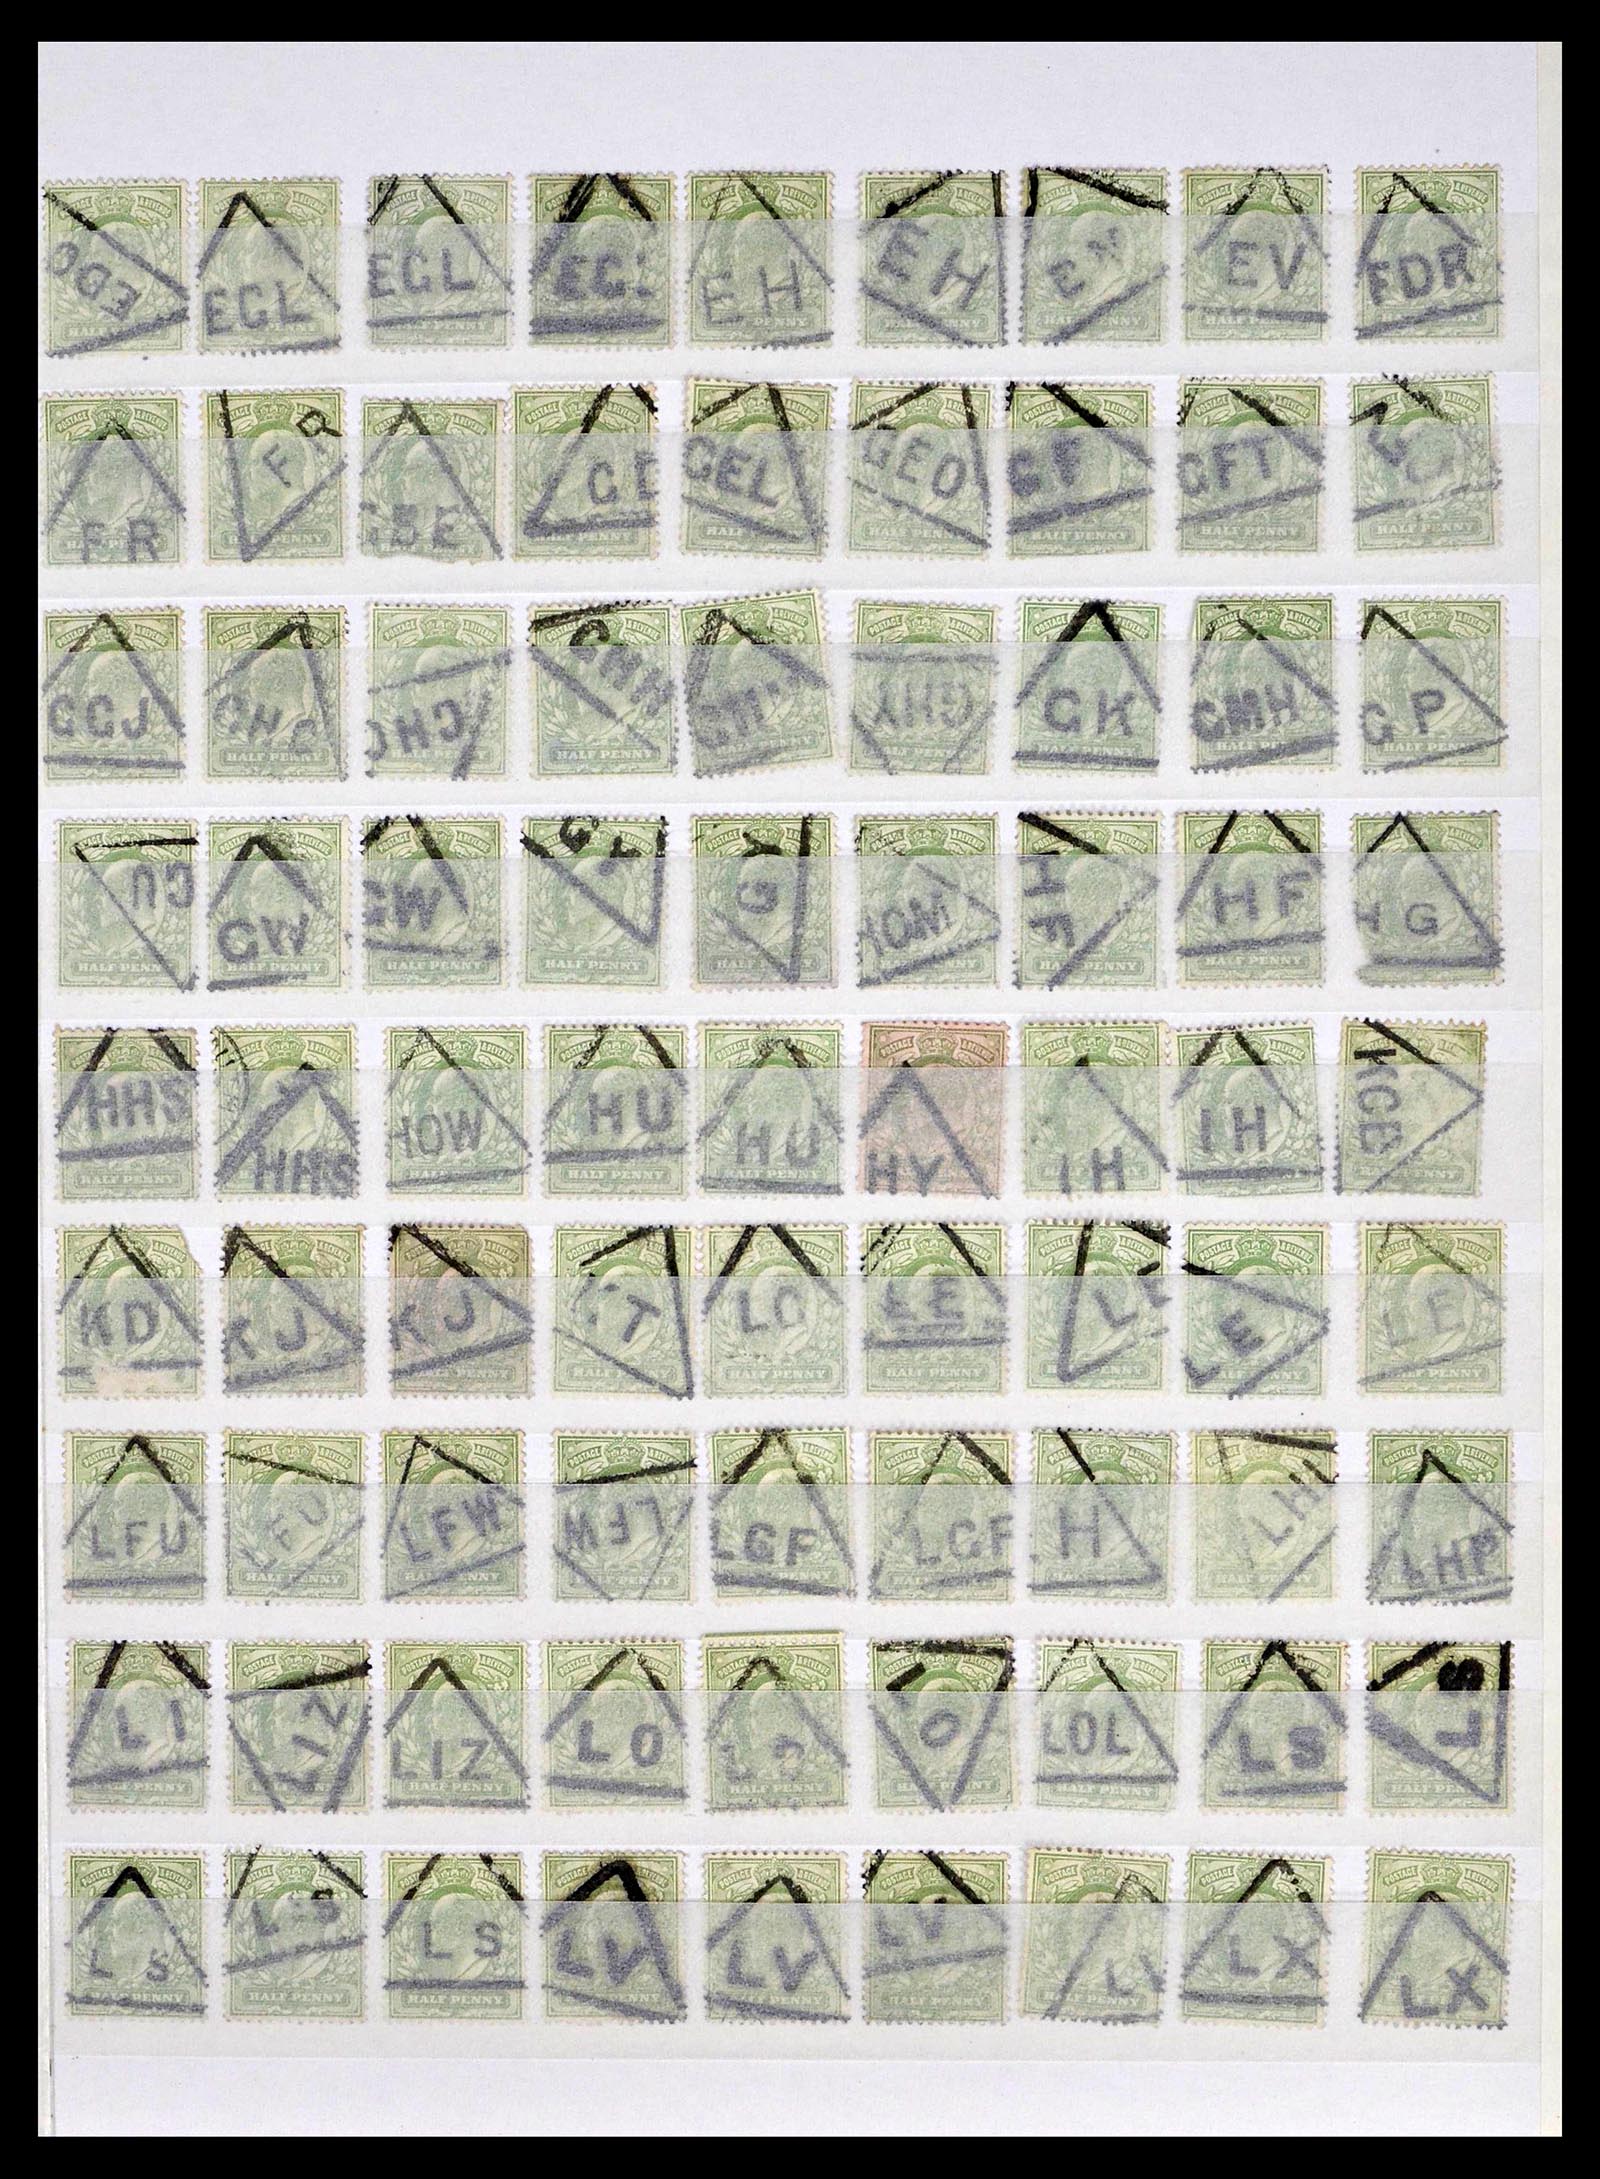 39196 0101 - Stamp collection 39196 Great Britain 1844-1955.